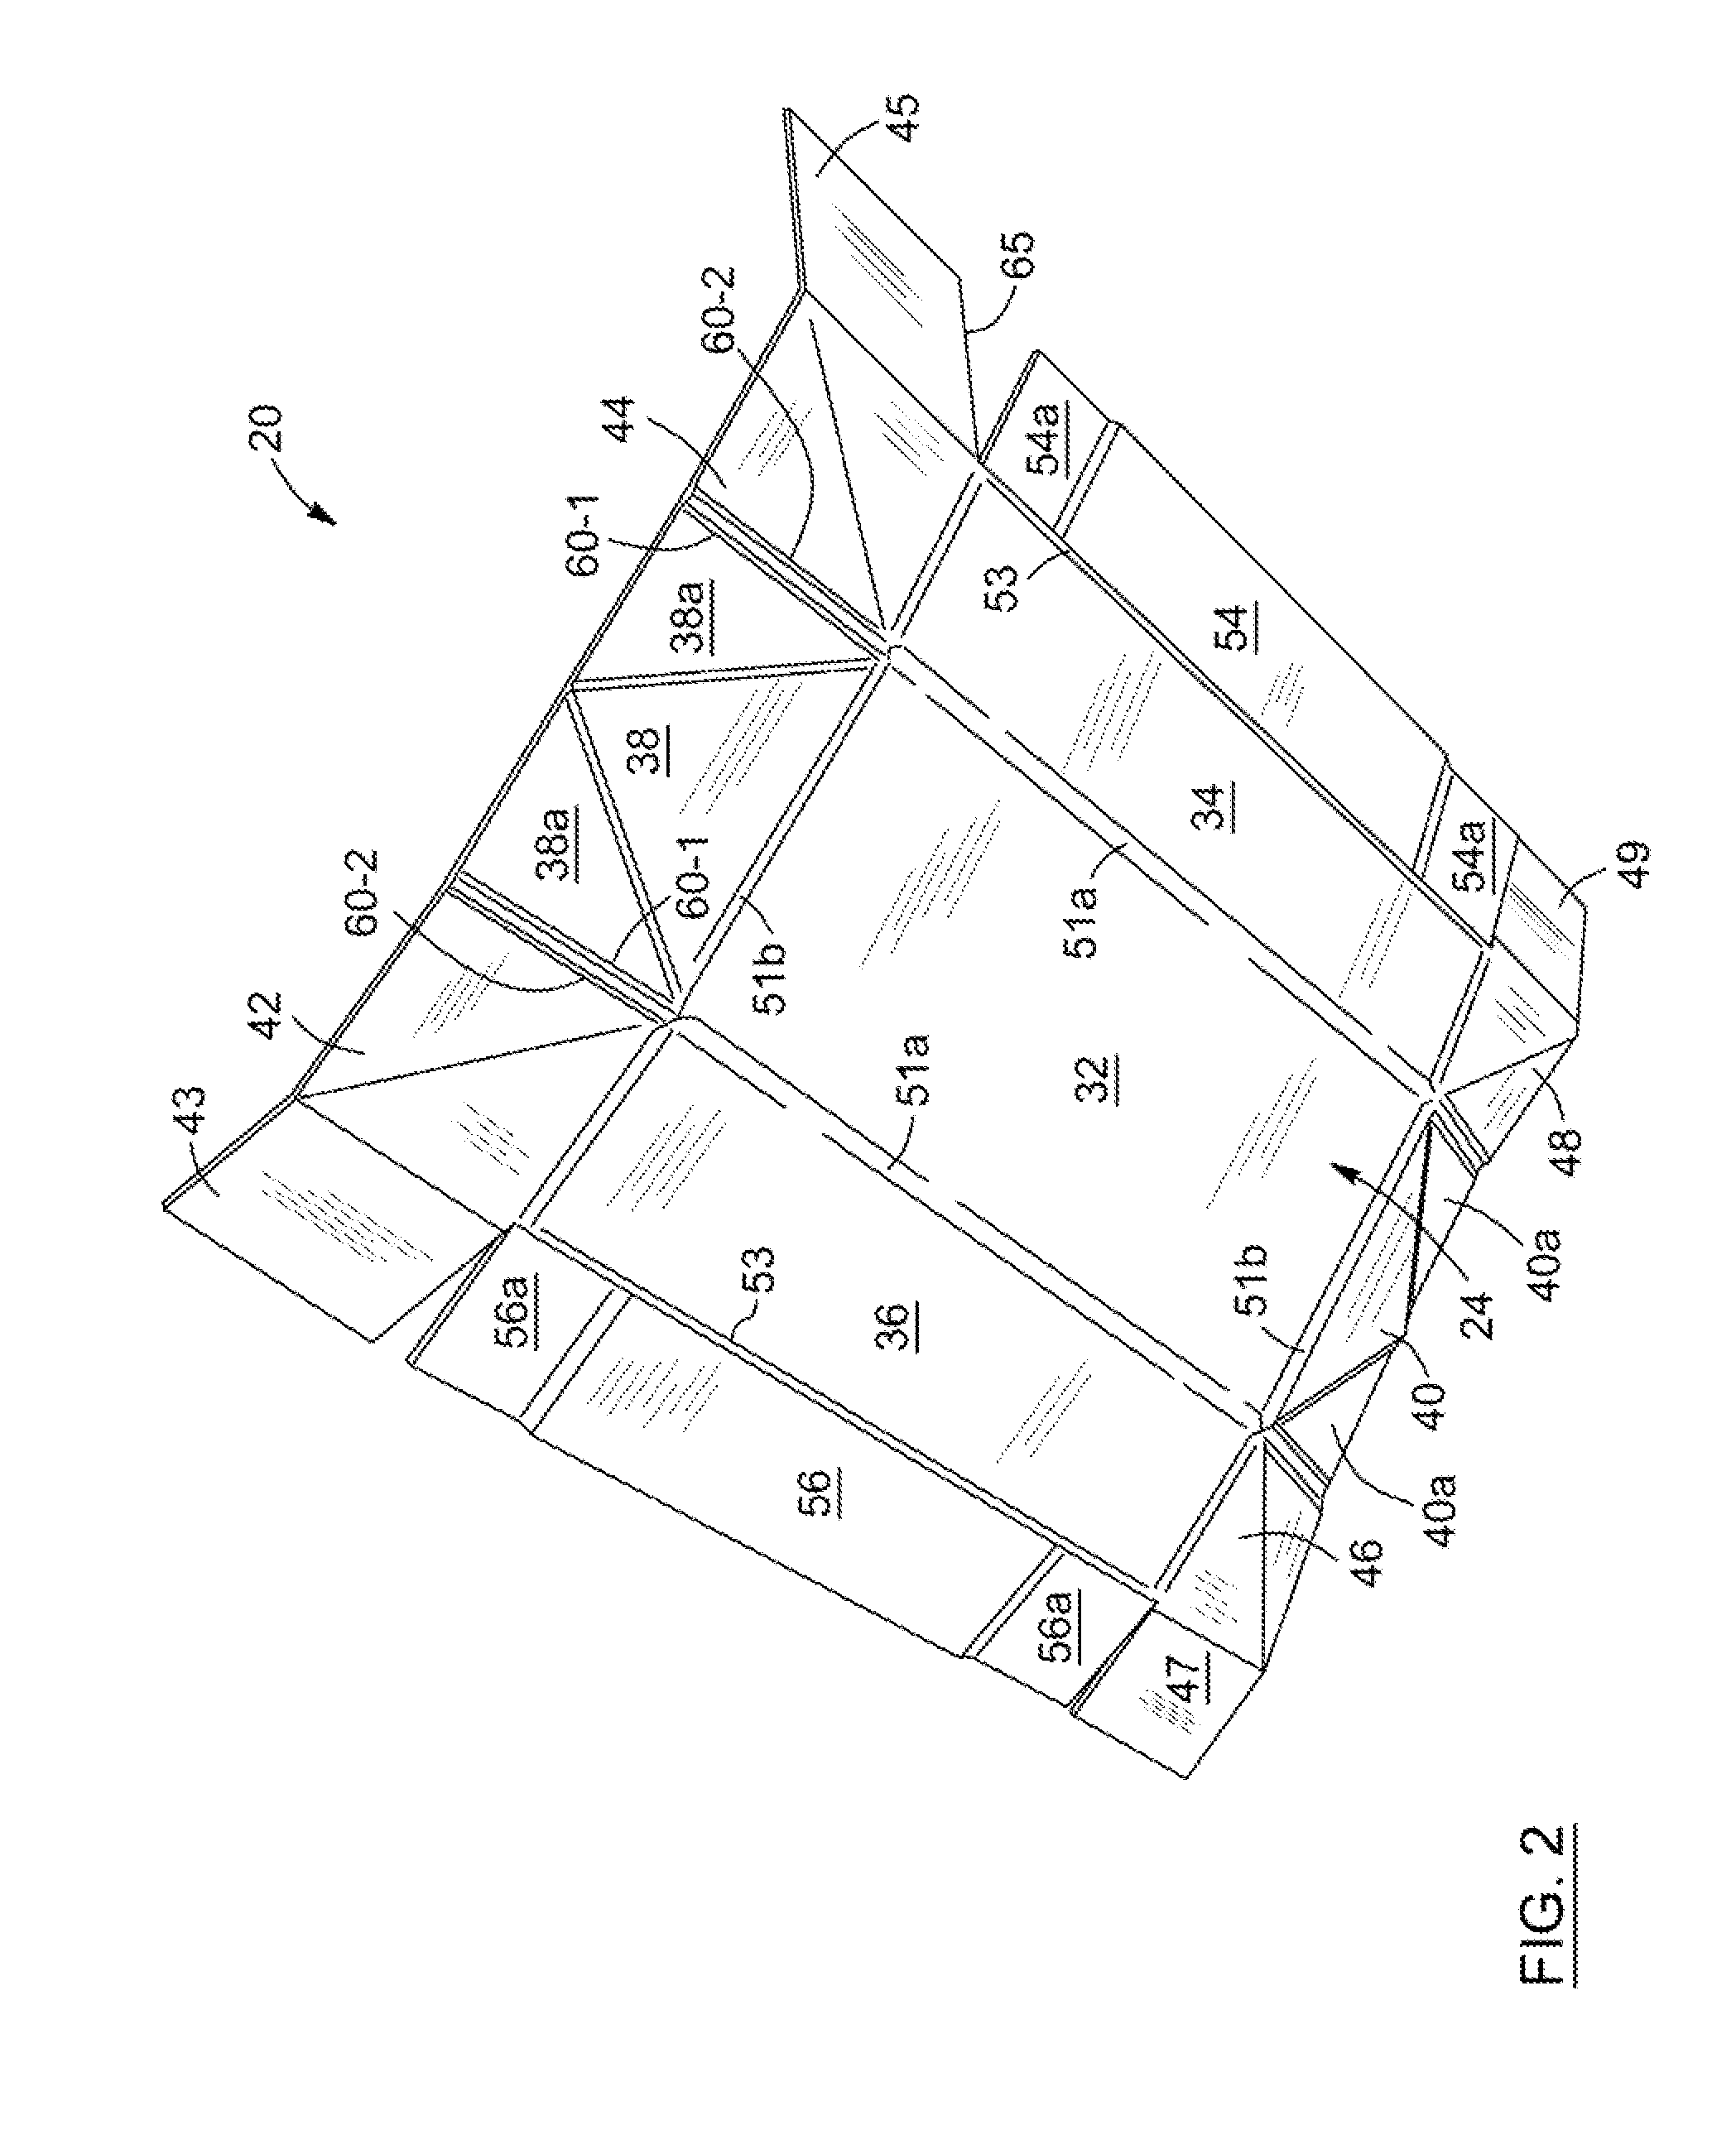 Thermal container, thermal liner for same and dies for making the thermal liner